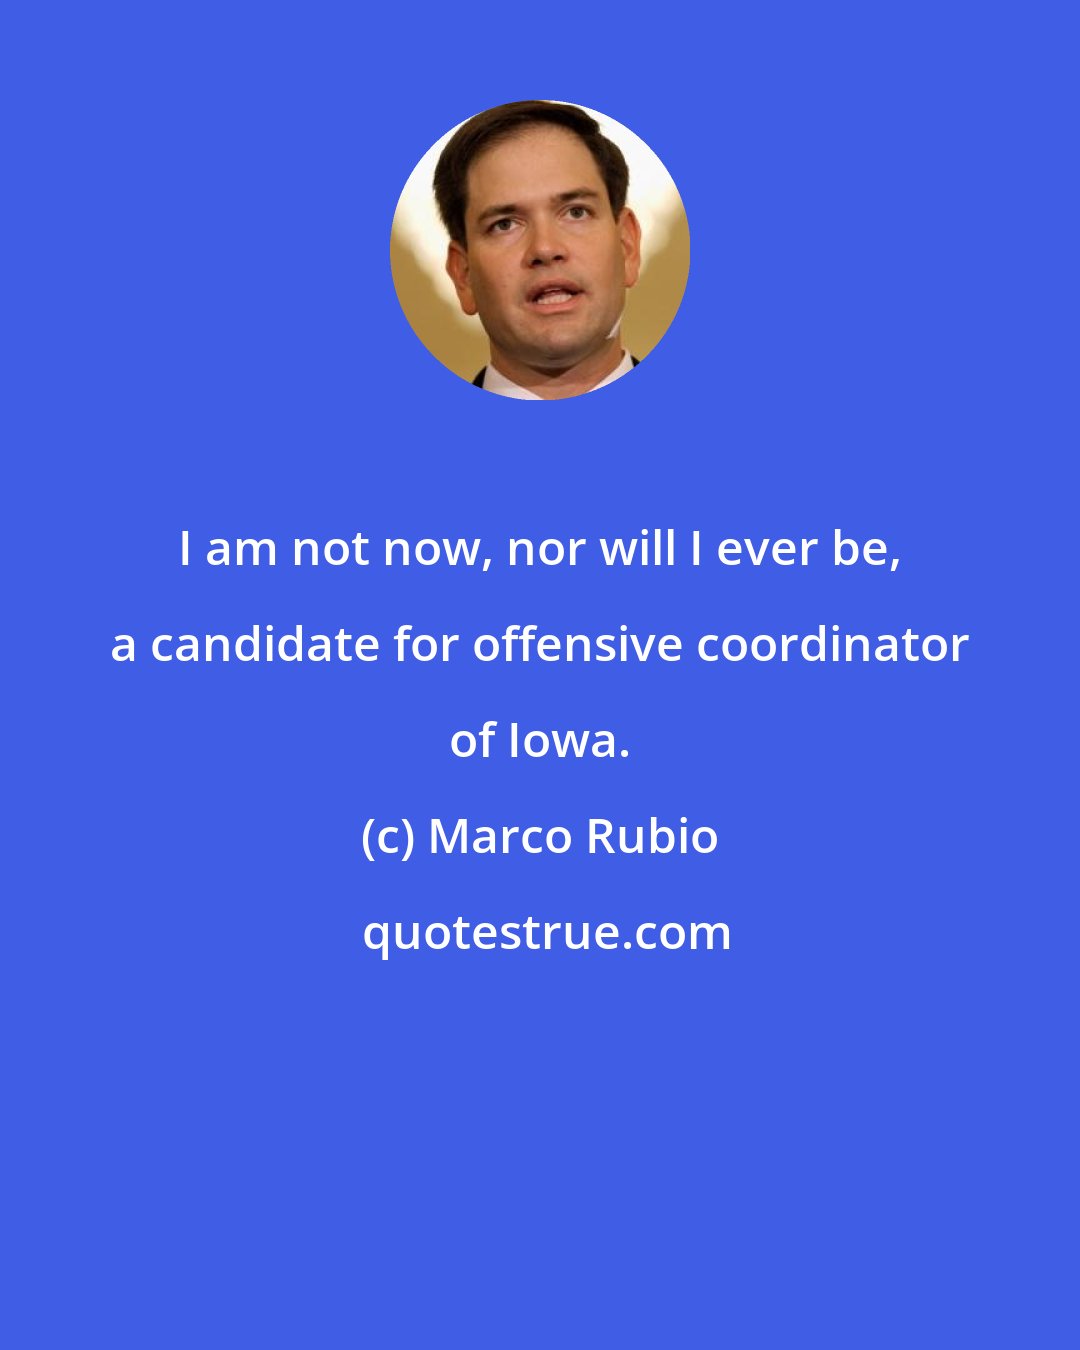 Marco Rubio: I am not now, nor will I ever be, a candidate for offensive coordinator of Iowa.